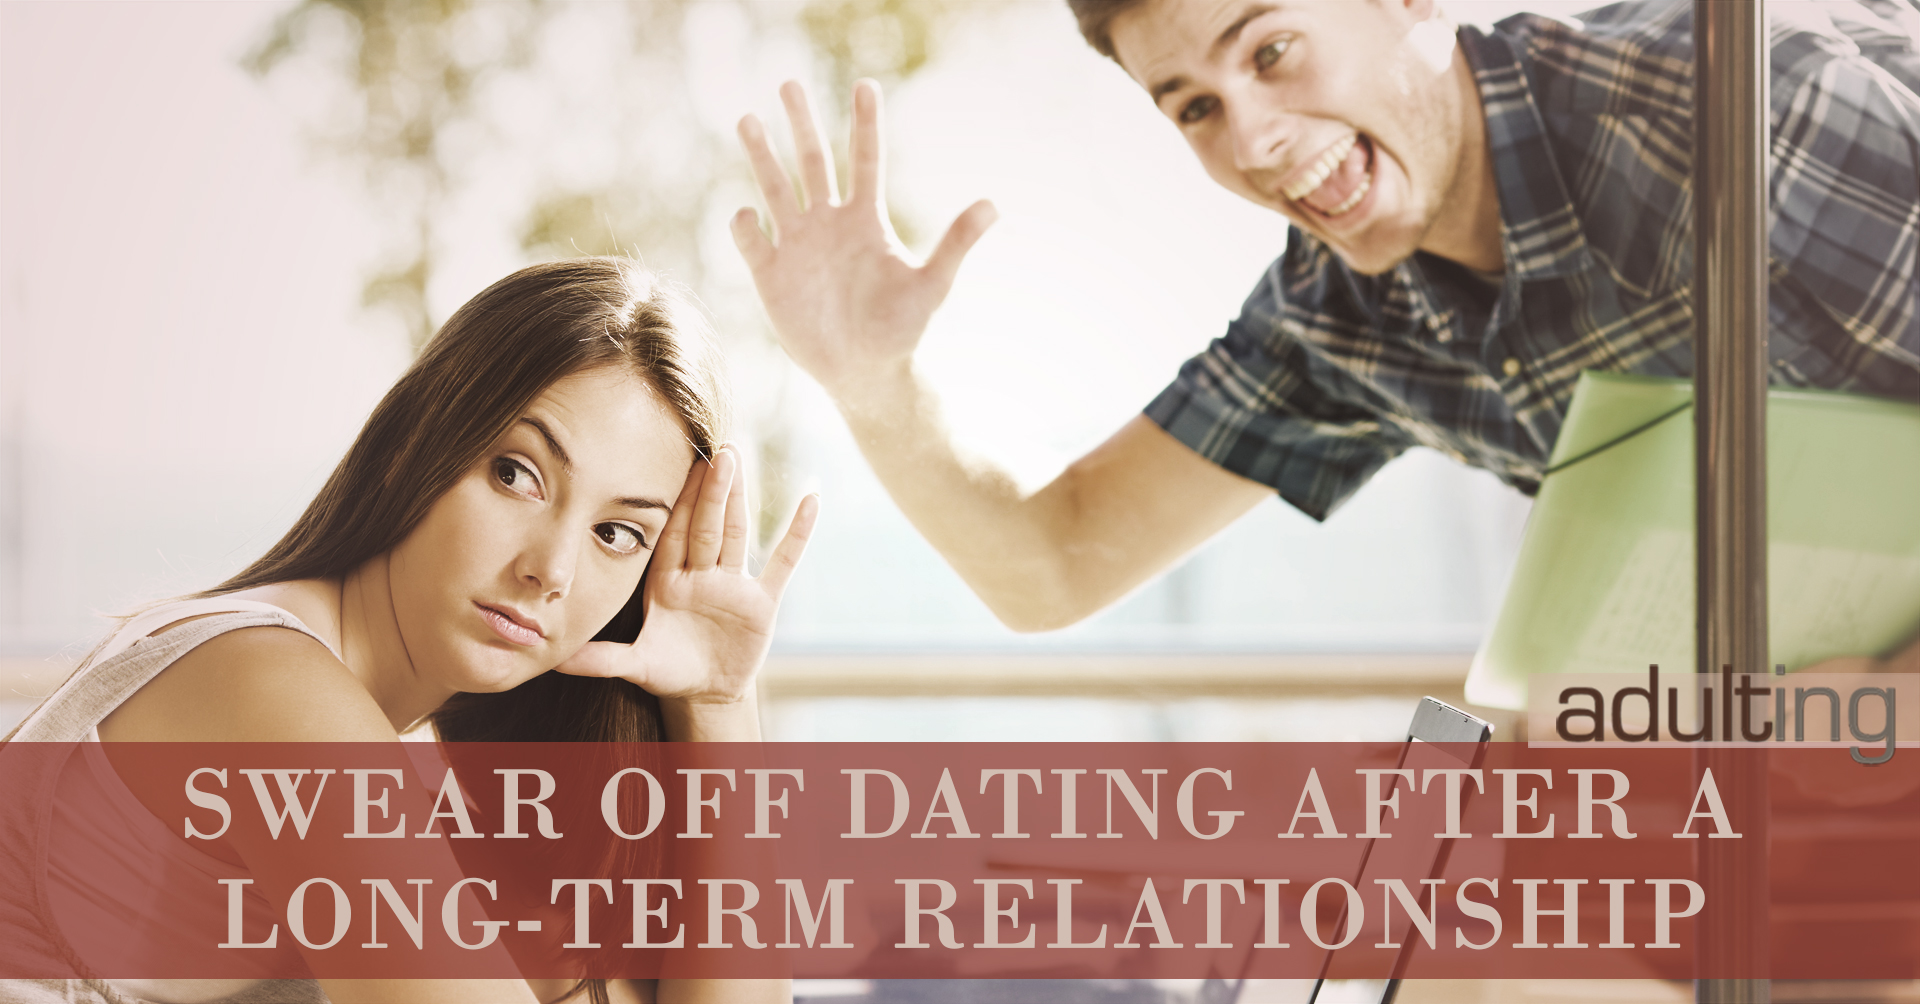 Swear off. Dating long term relationship. Dating after Divorce how long. Dating long distance after Divorce.